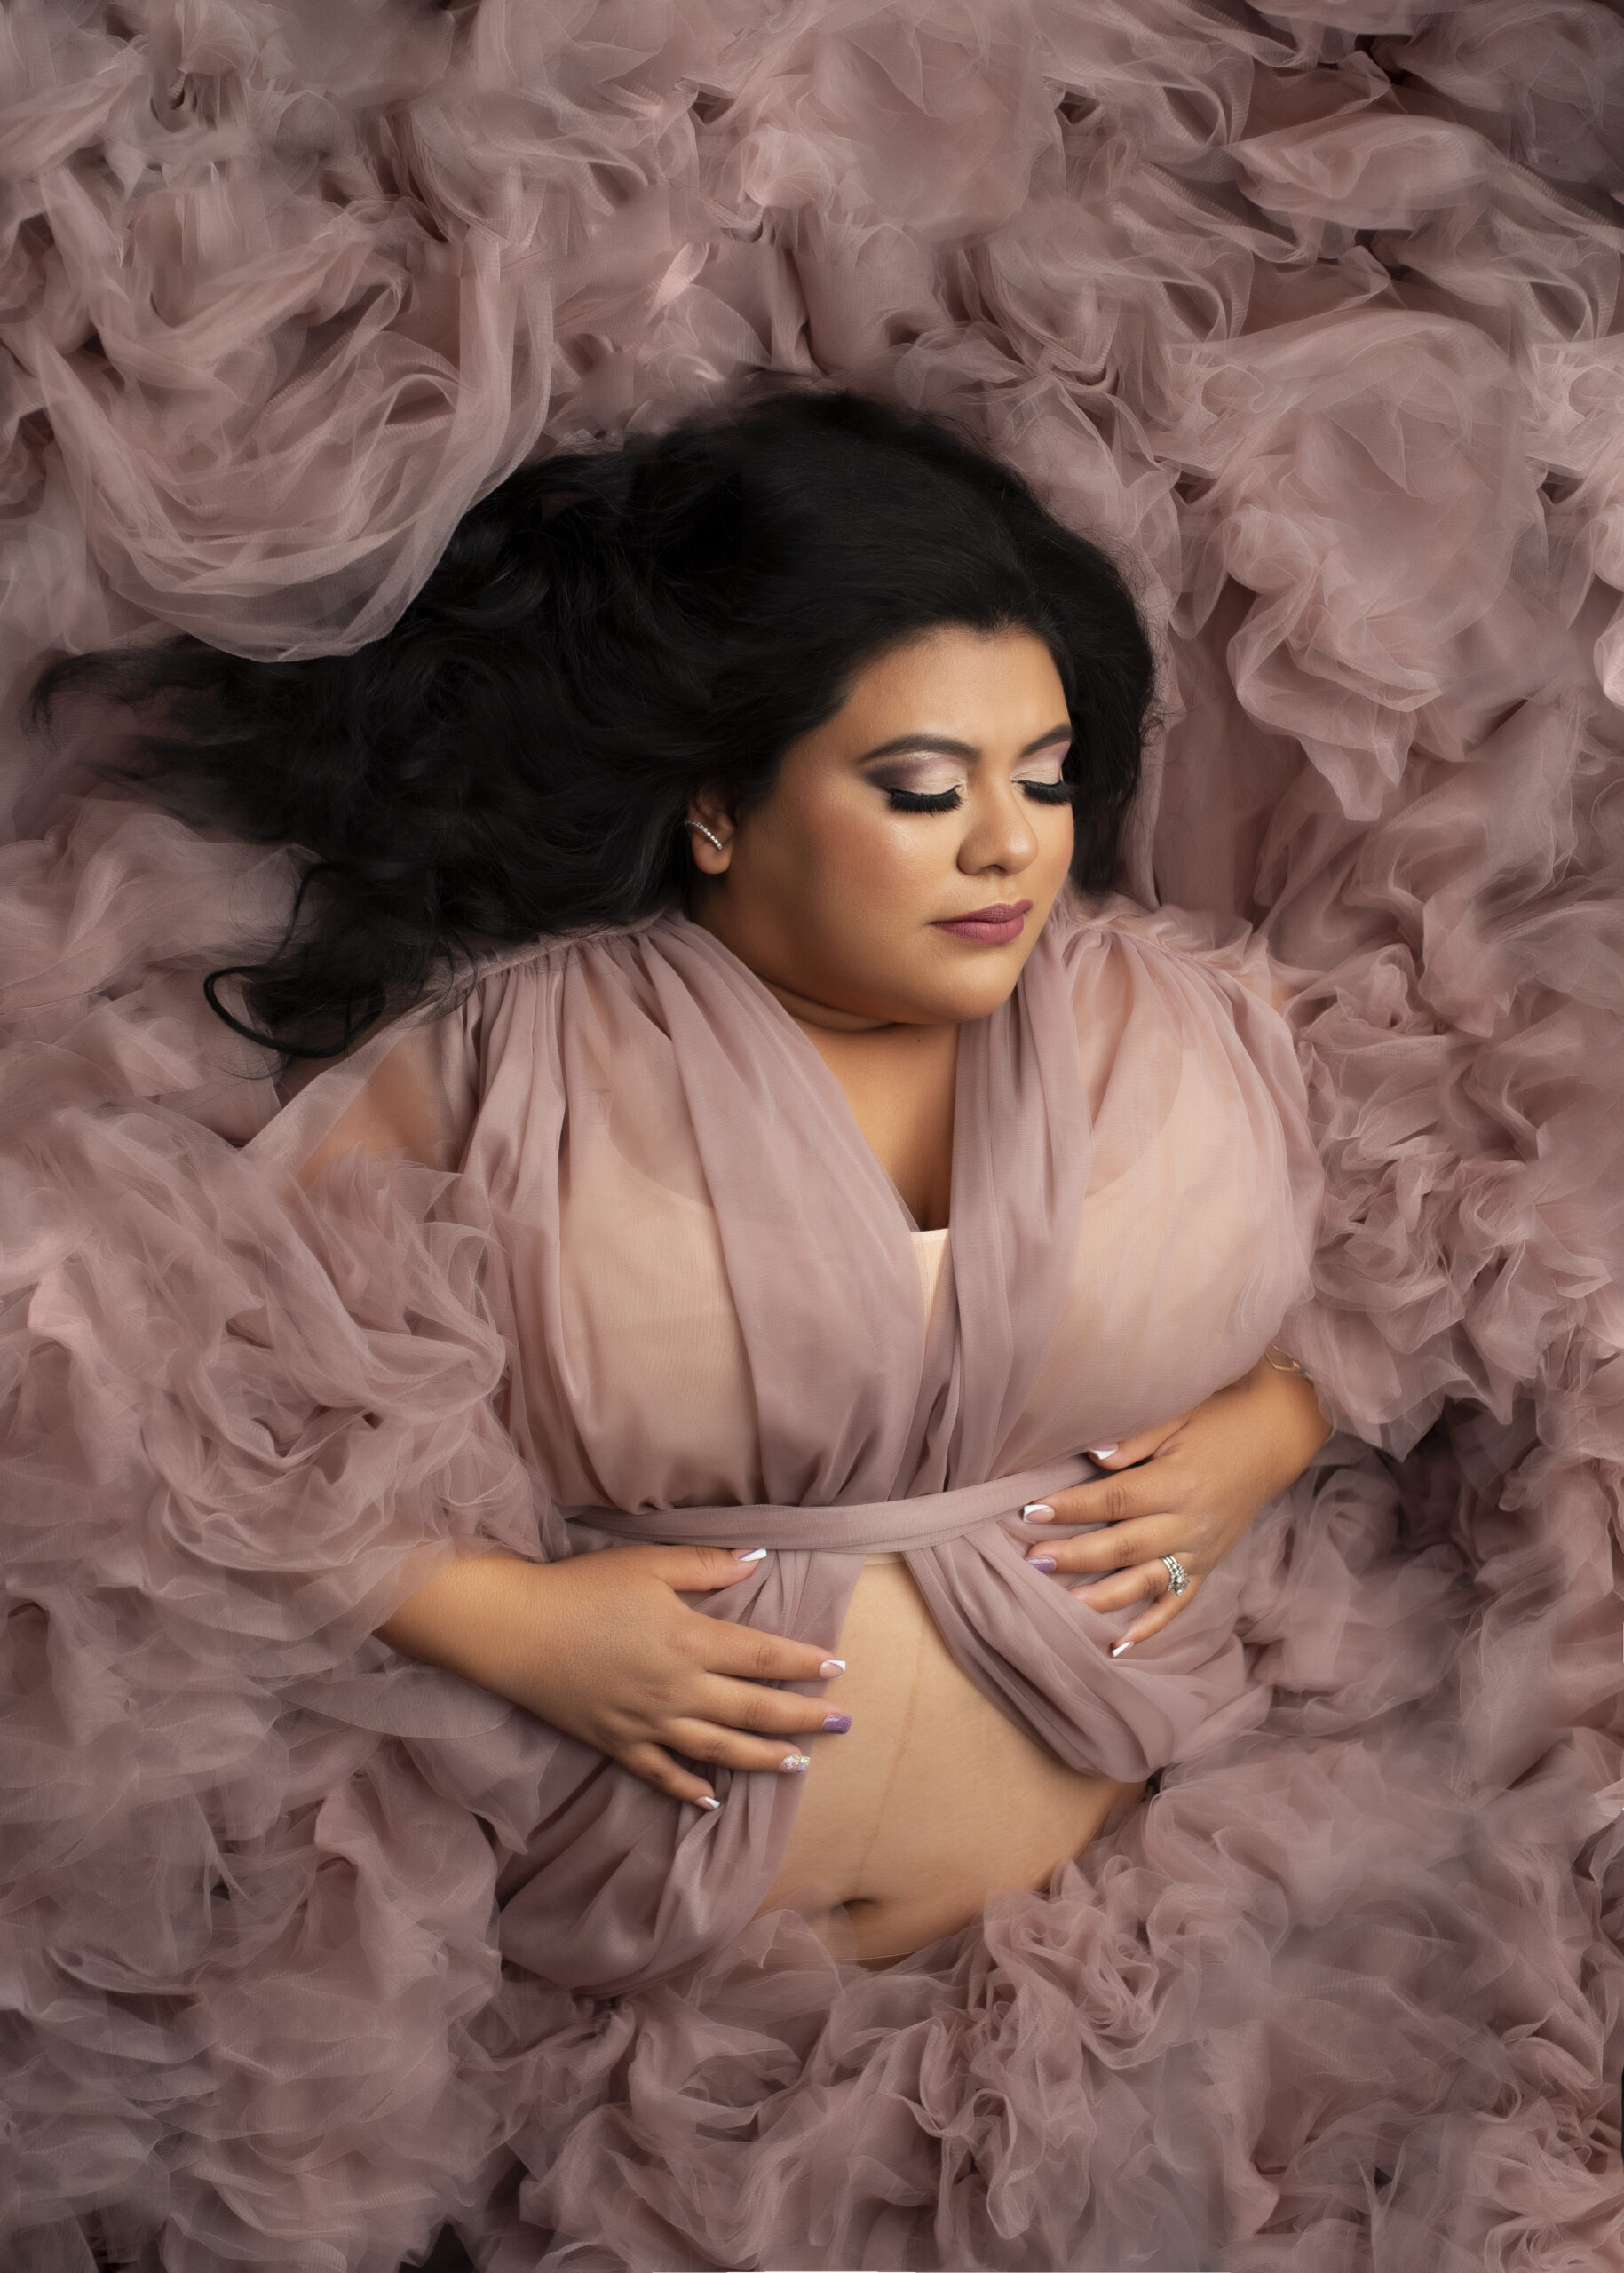 Grand rapids maternity photo session mother laying down holding baby bump in pink dress